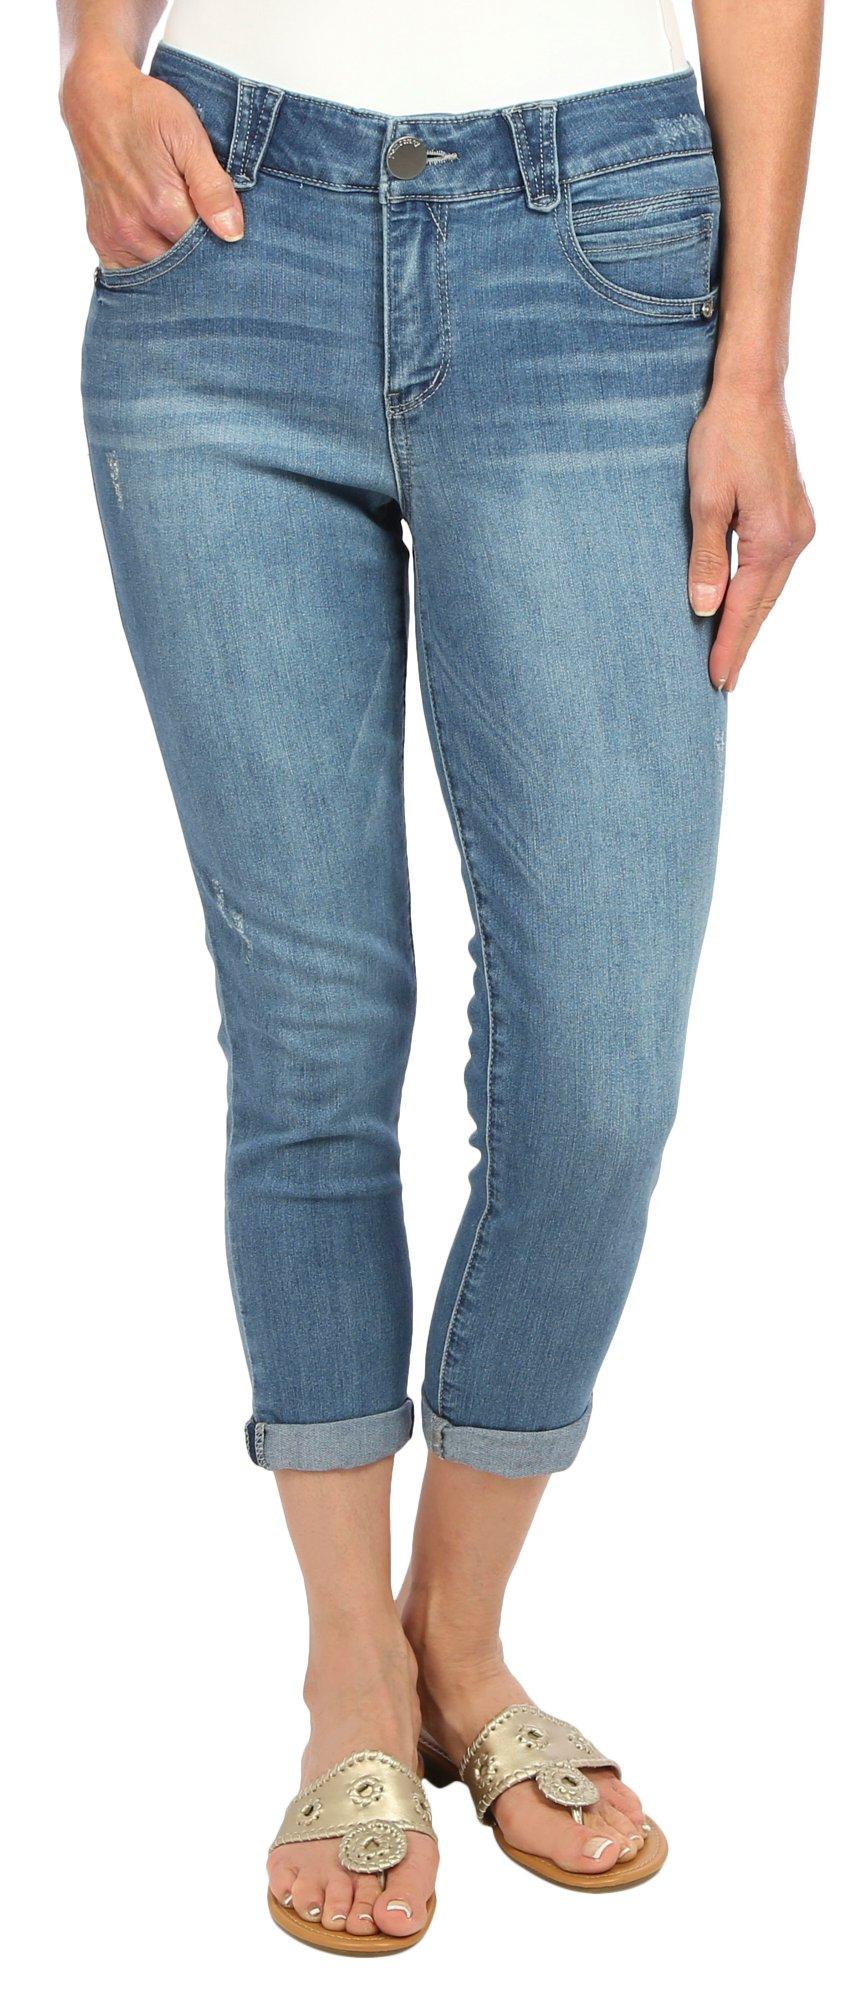 Petite 23.5 in. Ab Solution Ankle Skimmer Jeans